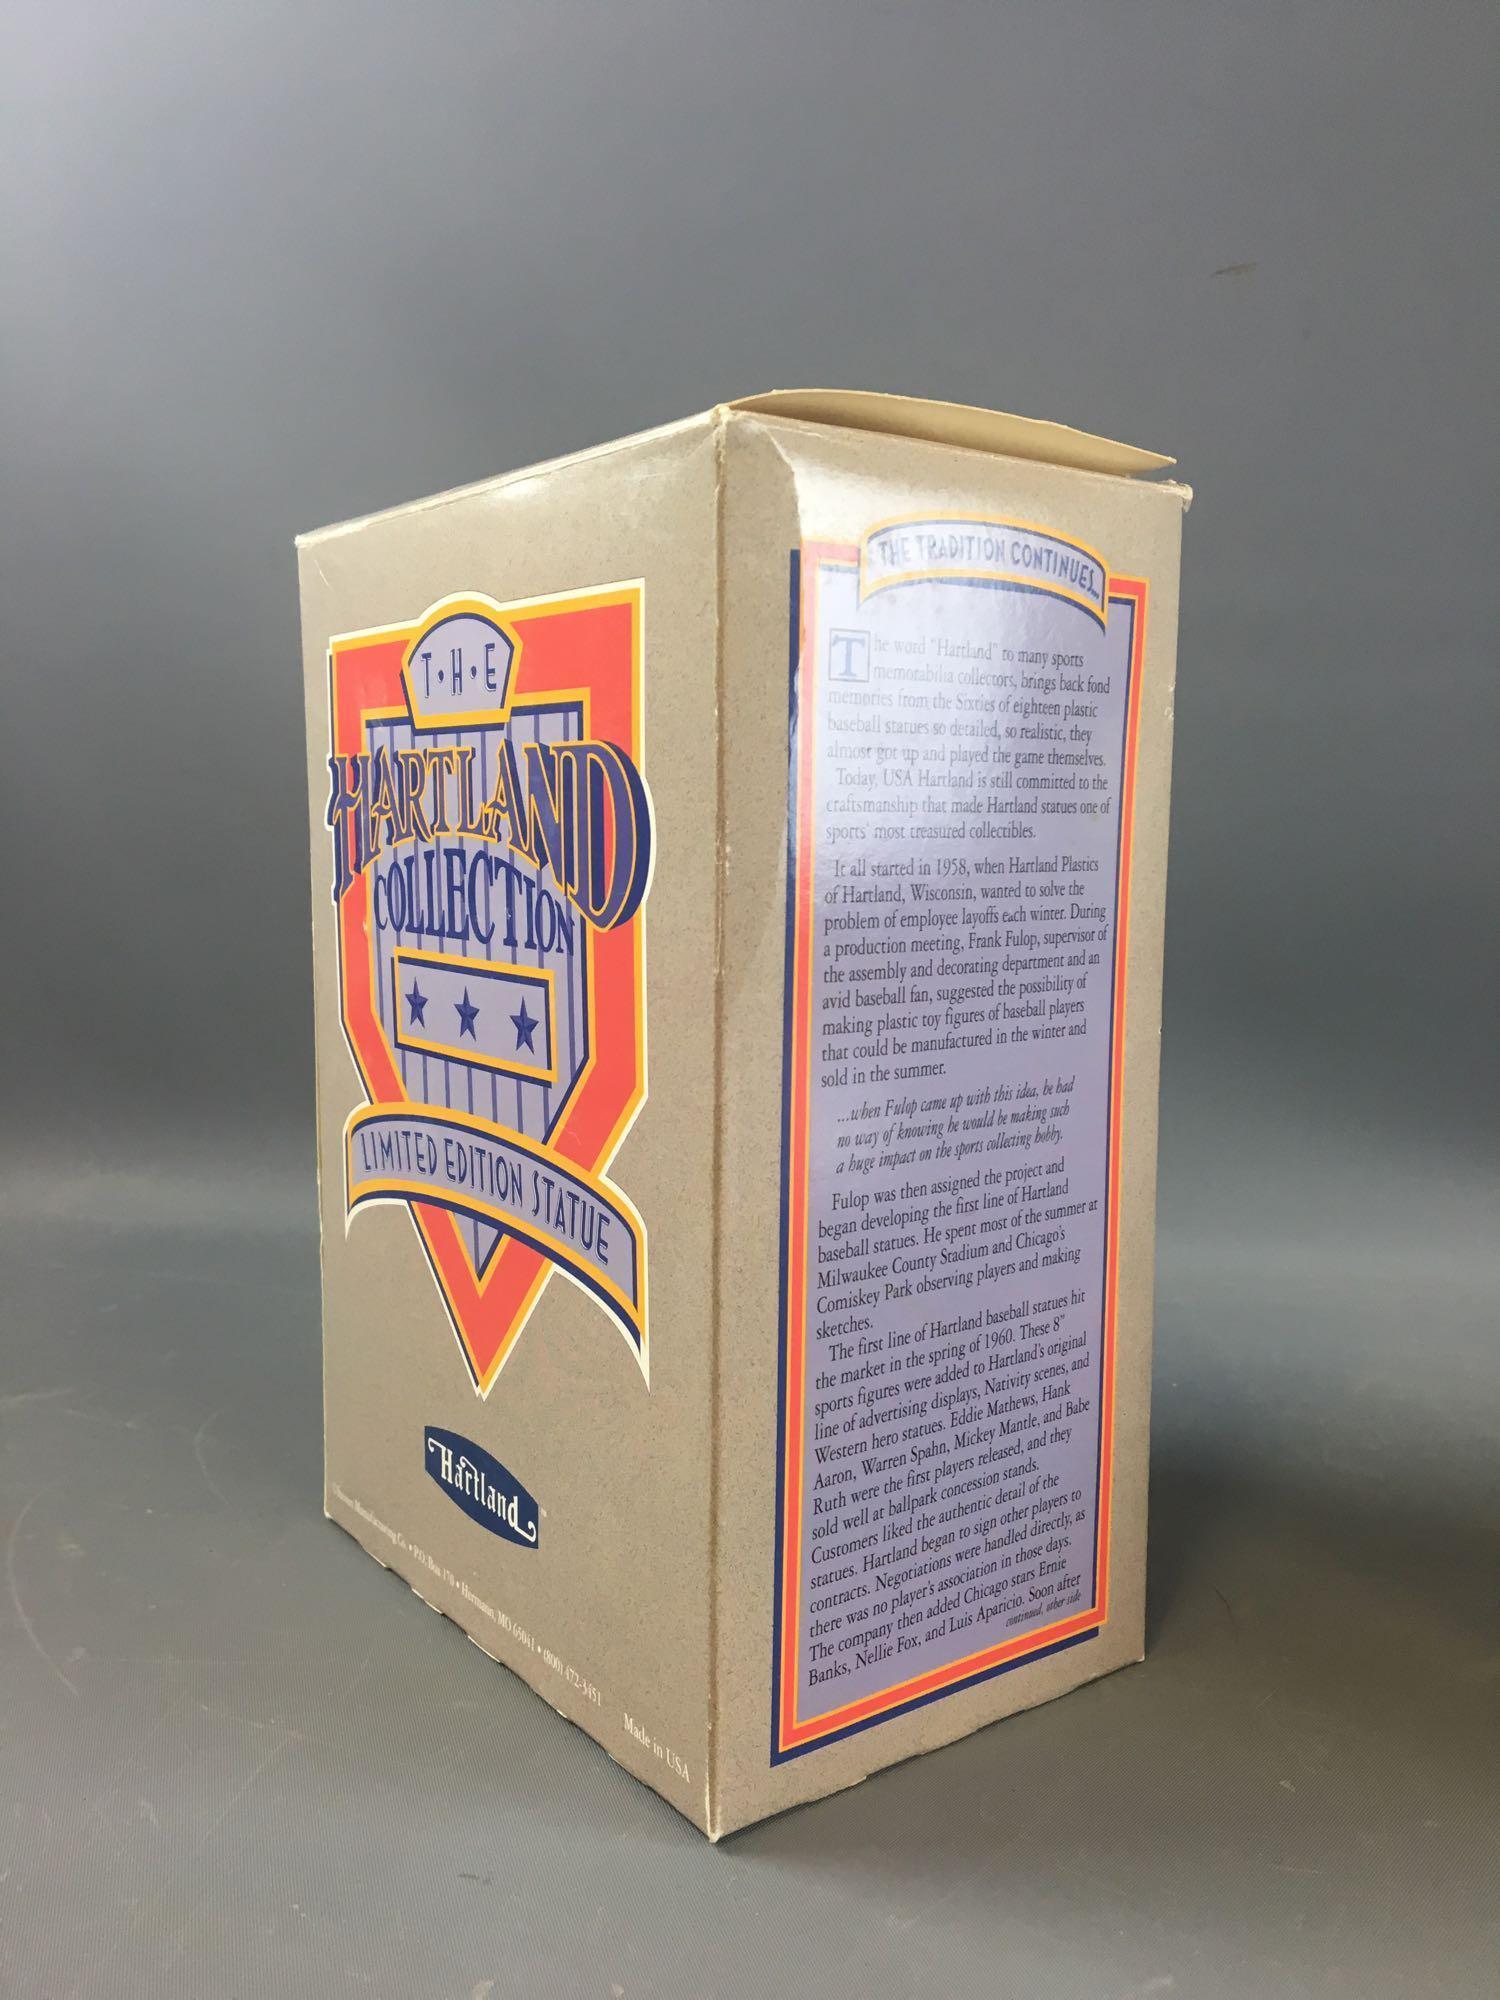 Cy Young Limited Edition Numbered Hartland Statue with original box